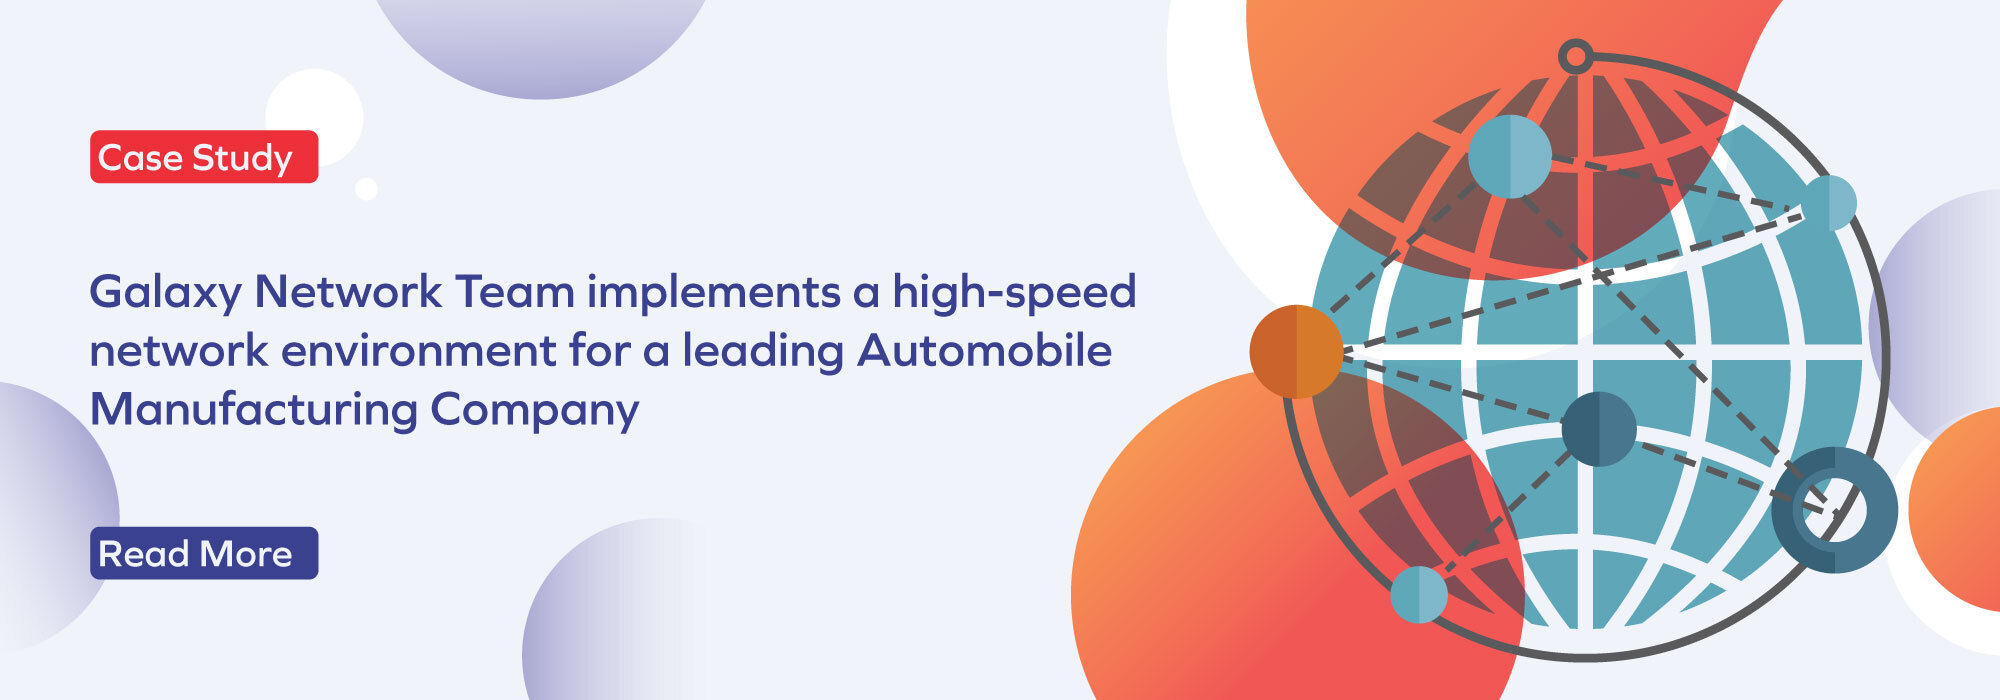 Automobile manufacturing company implemented a high-speed network environment